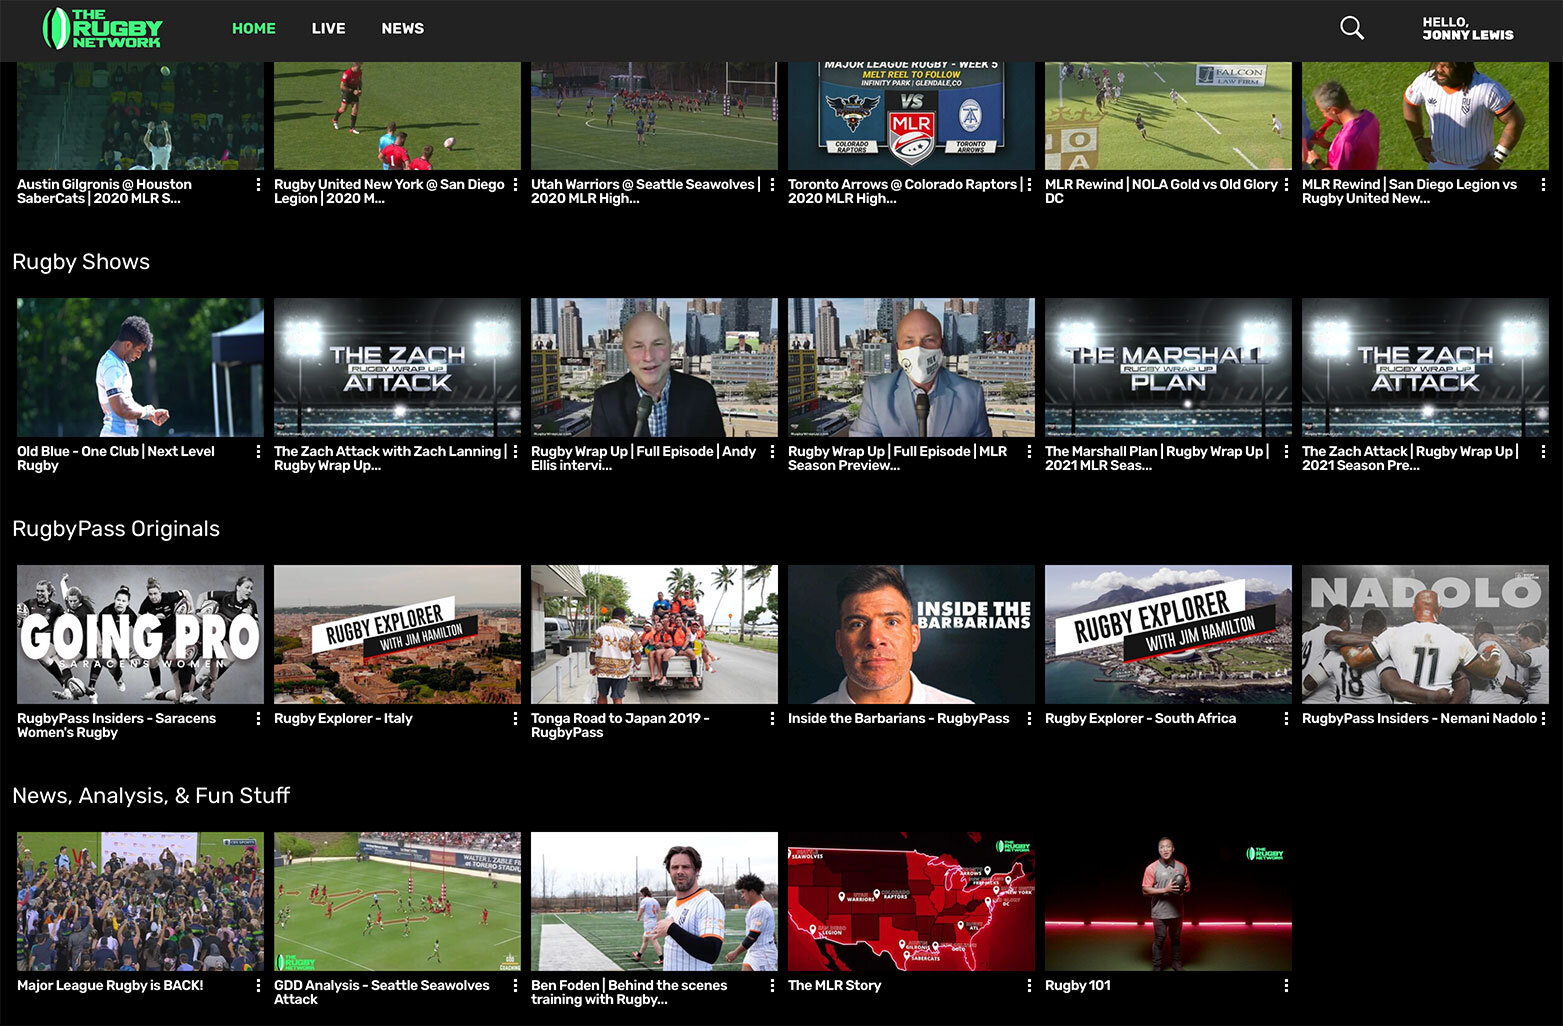 Jonny Lewis films work on The Rugby Network app and streaming TV — Jonny Lewis Films